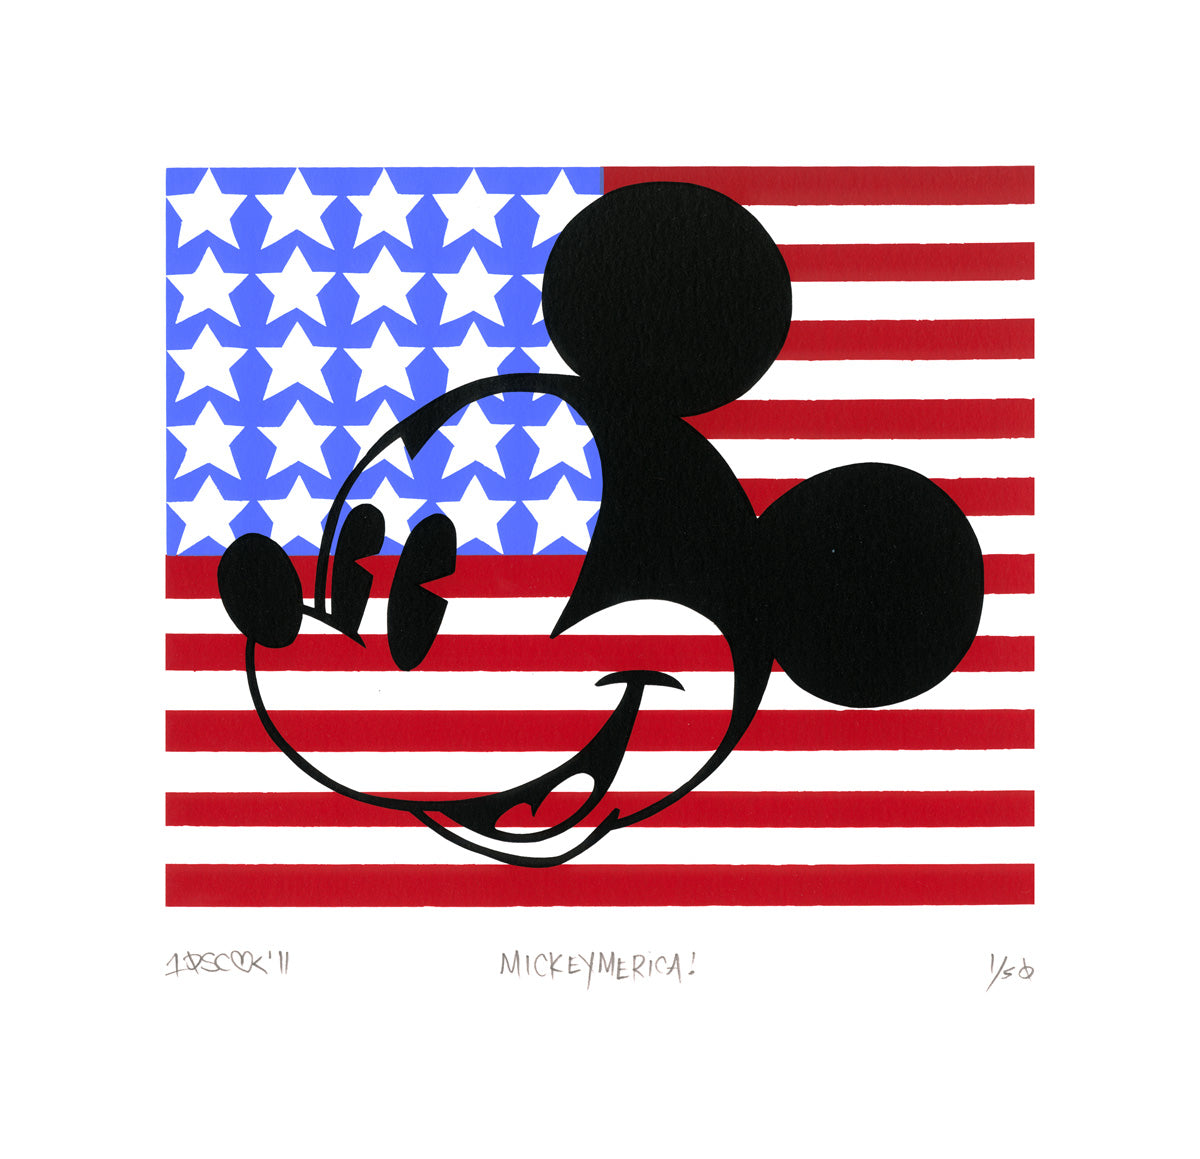 Tennessee Loveless Disney "Mickeymerica" Limited Edition Serigraph on Paper